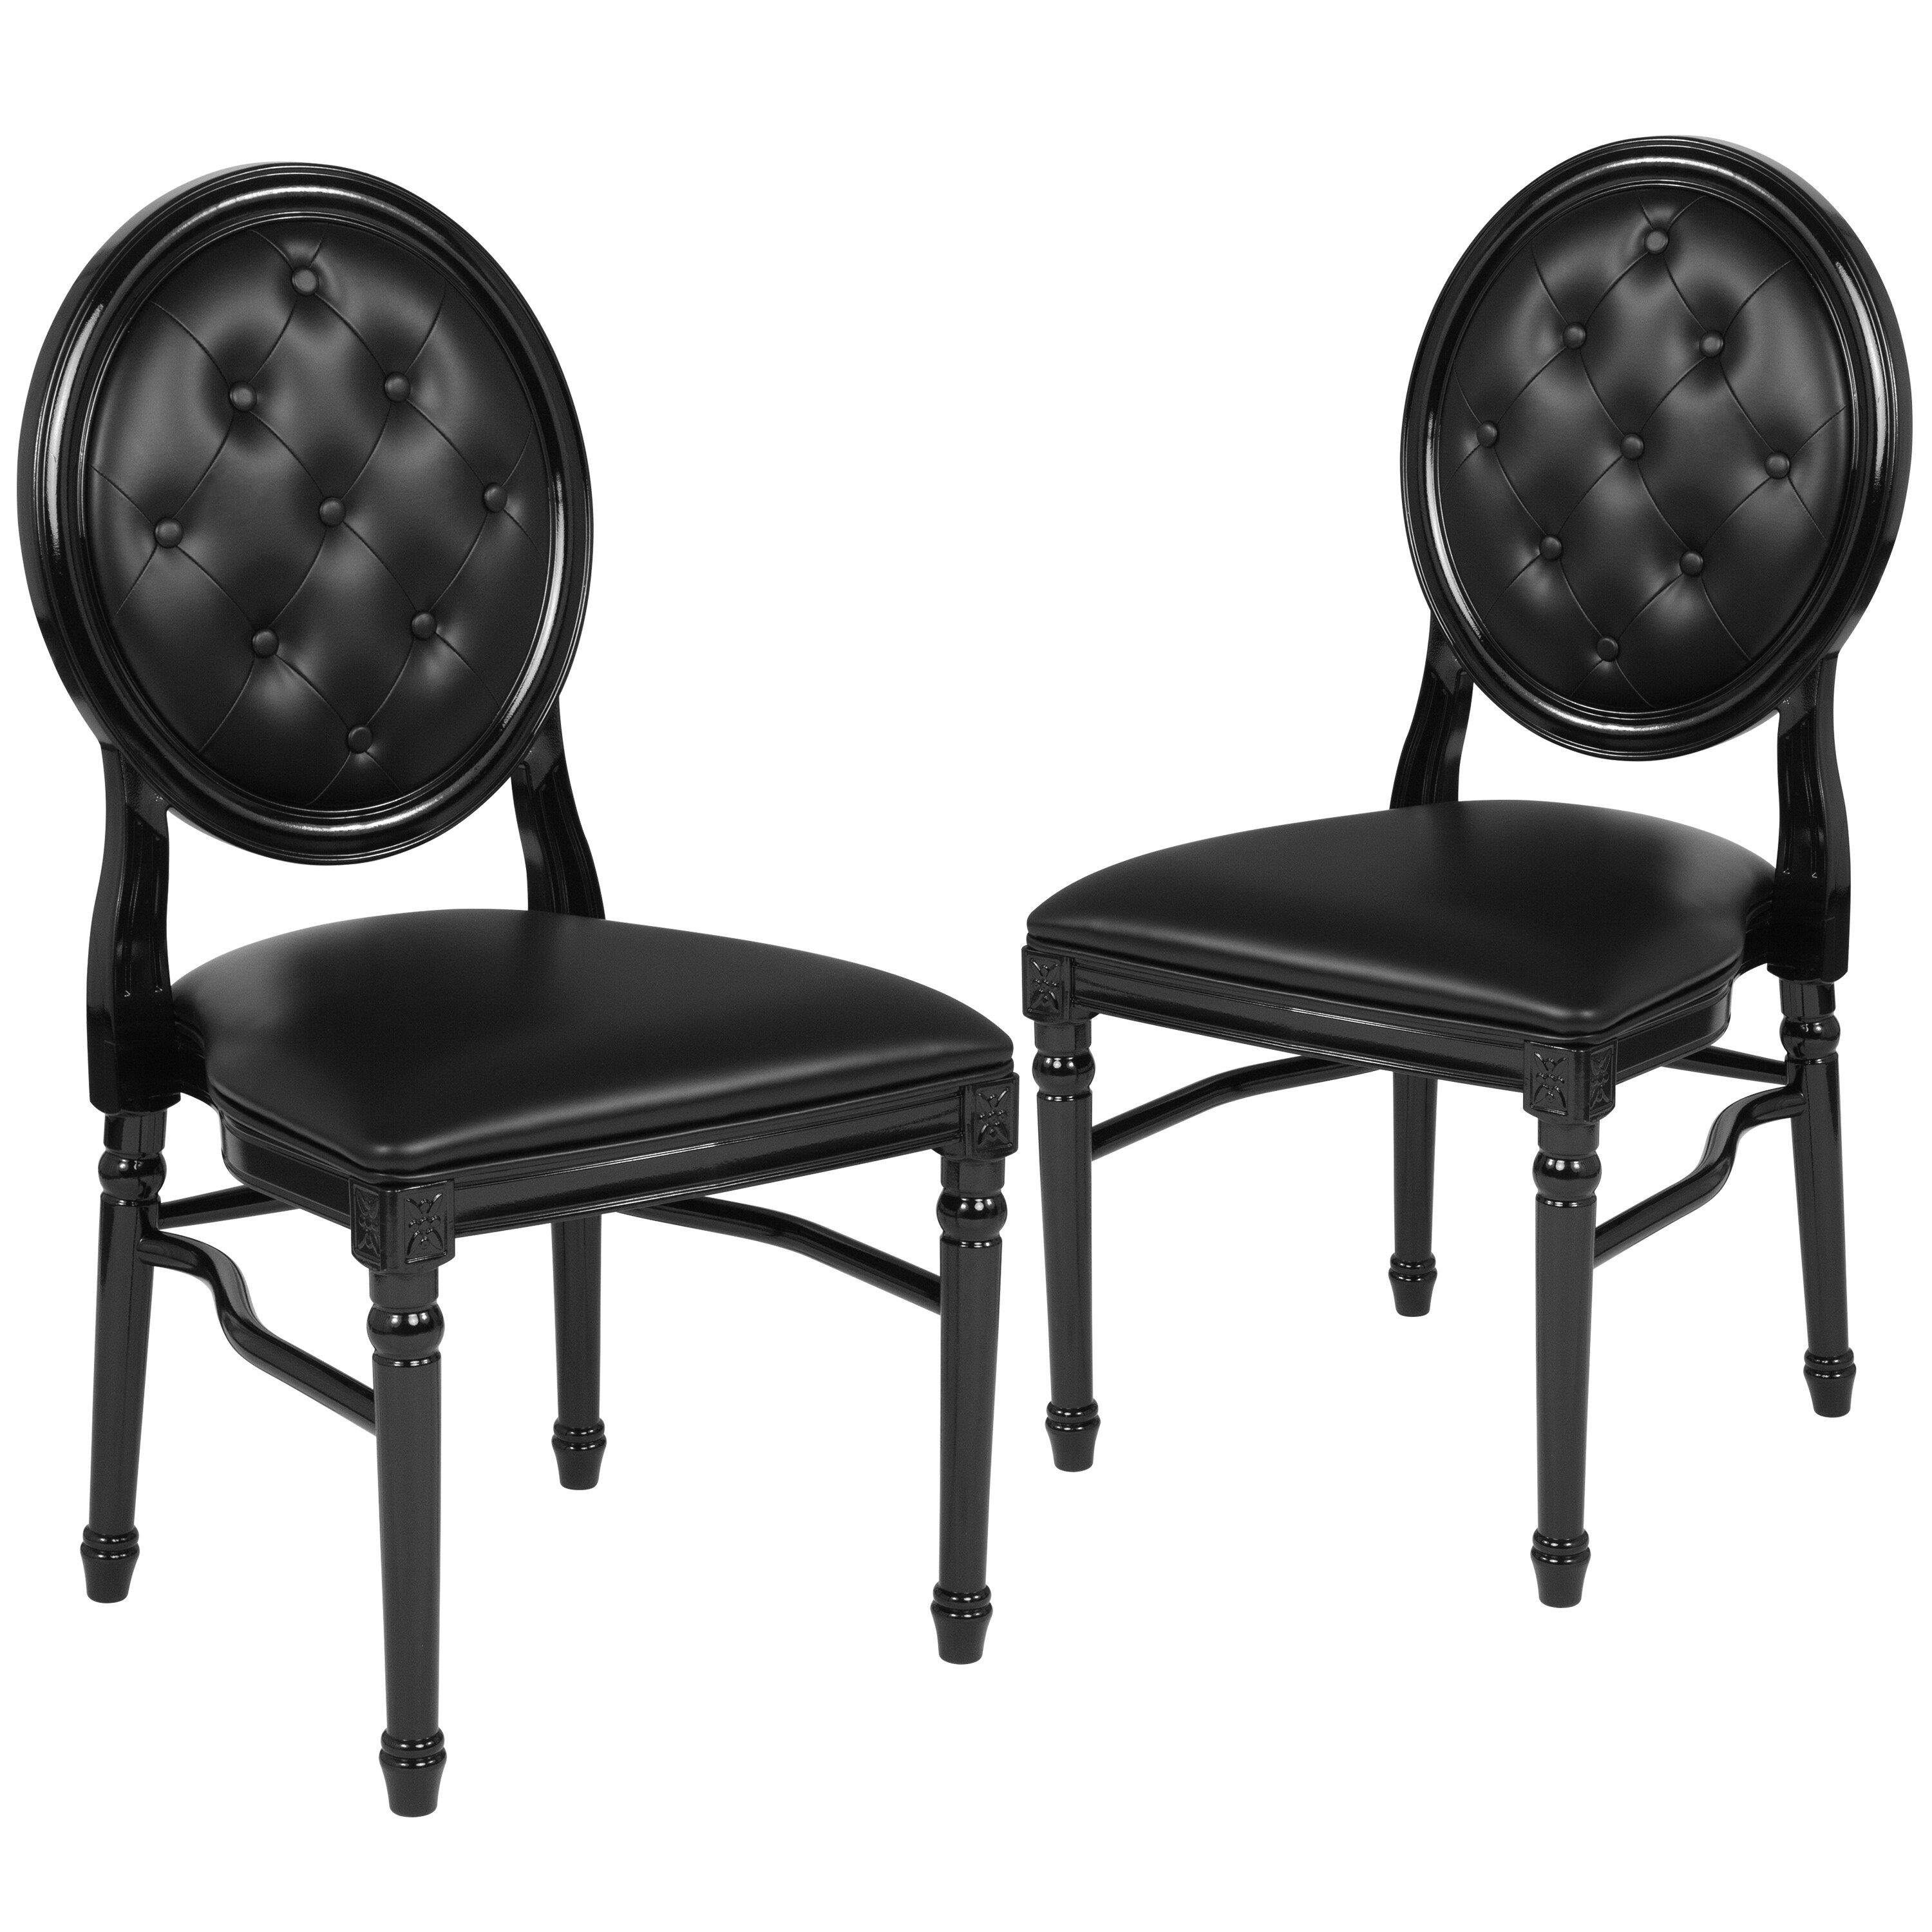 Asday Dining Chairs, Classic King Louis Black Faux Leather Upholstered  Dining Chairs, Luxurious Dining Chairs with Polished Gold Oval Back and